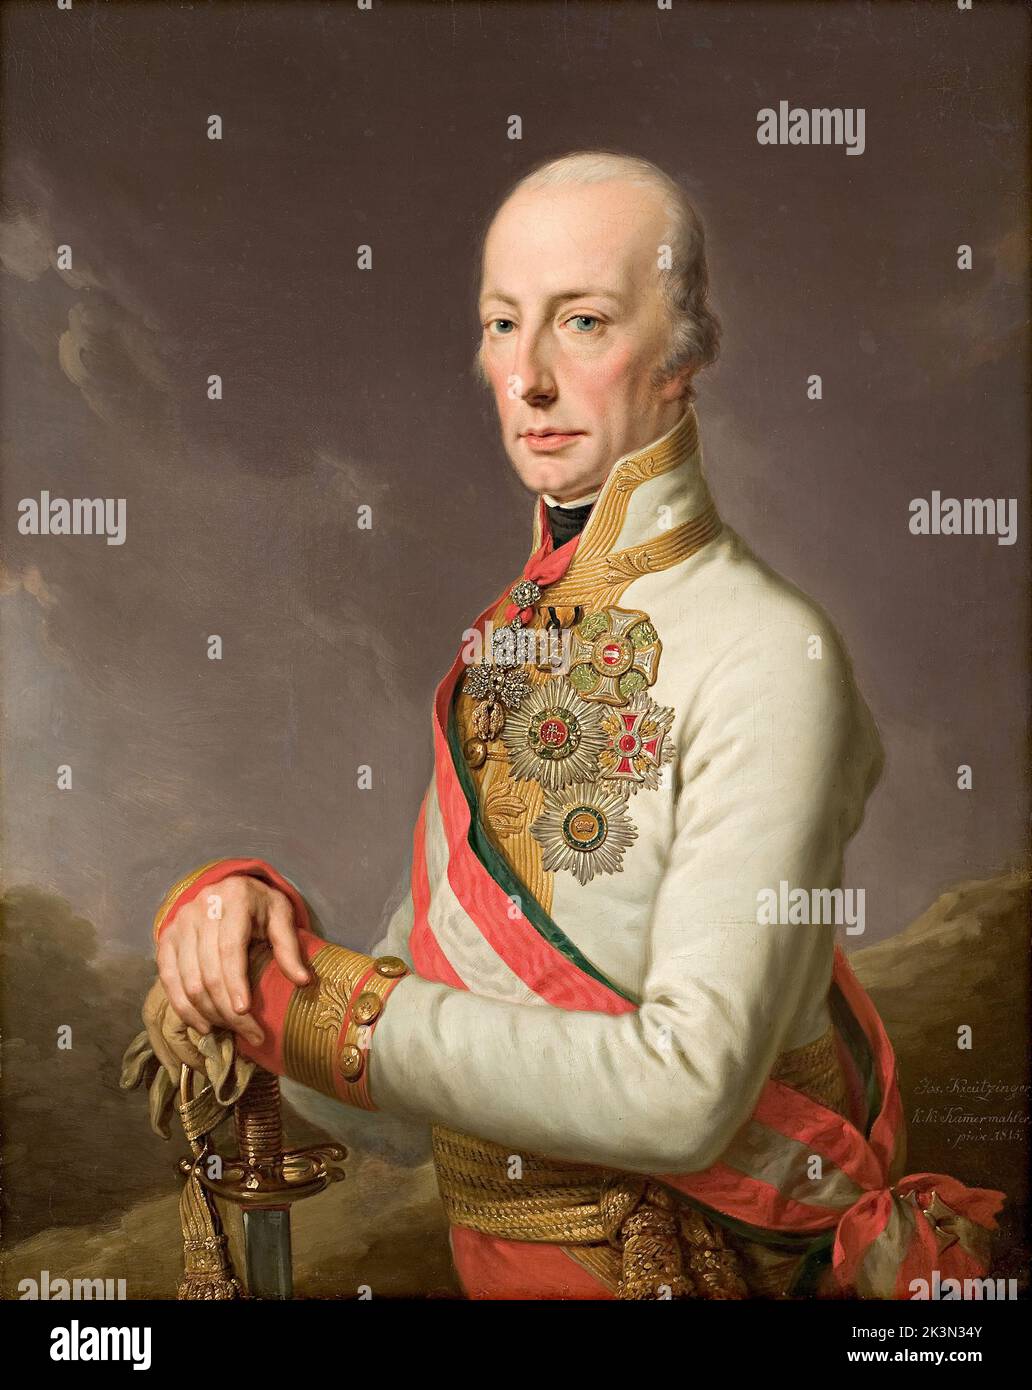 Francis II (1768 – 1835) last Holy Roman Emperor (from 1792 to 1806) and, as Francis I, the first Emperor of Austria, from 1804 to 1835. He assumed the title of Emperor of Austria in response to the coronation of Napoleon as Emperor of the French. Soon after Napoleon created the Confederation of the Rhine, Francis abdicated as Holy Roman Emperor. He was King of Hungary, Croatia and Bohemia. He also served as the first president of the German Confederation following its establishment in 1815. Kaiser Franz I, Painting by Joseph Kreutzinger Stock Photo